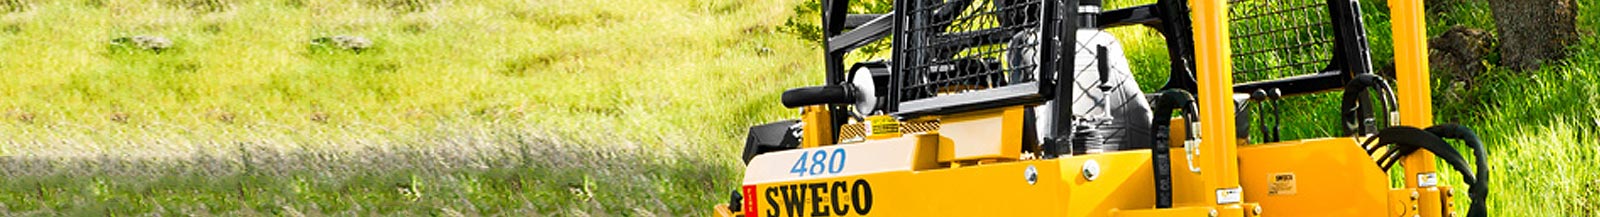 SWECO PRODUCTS, INC.